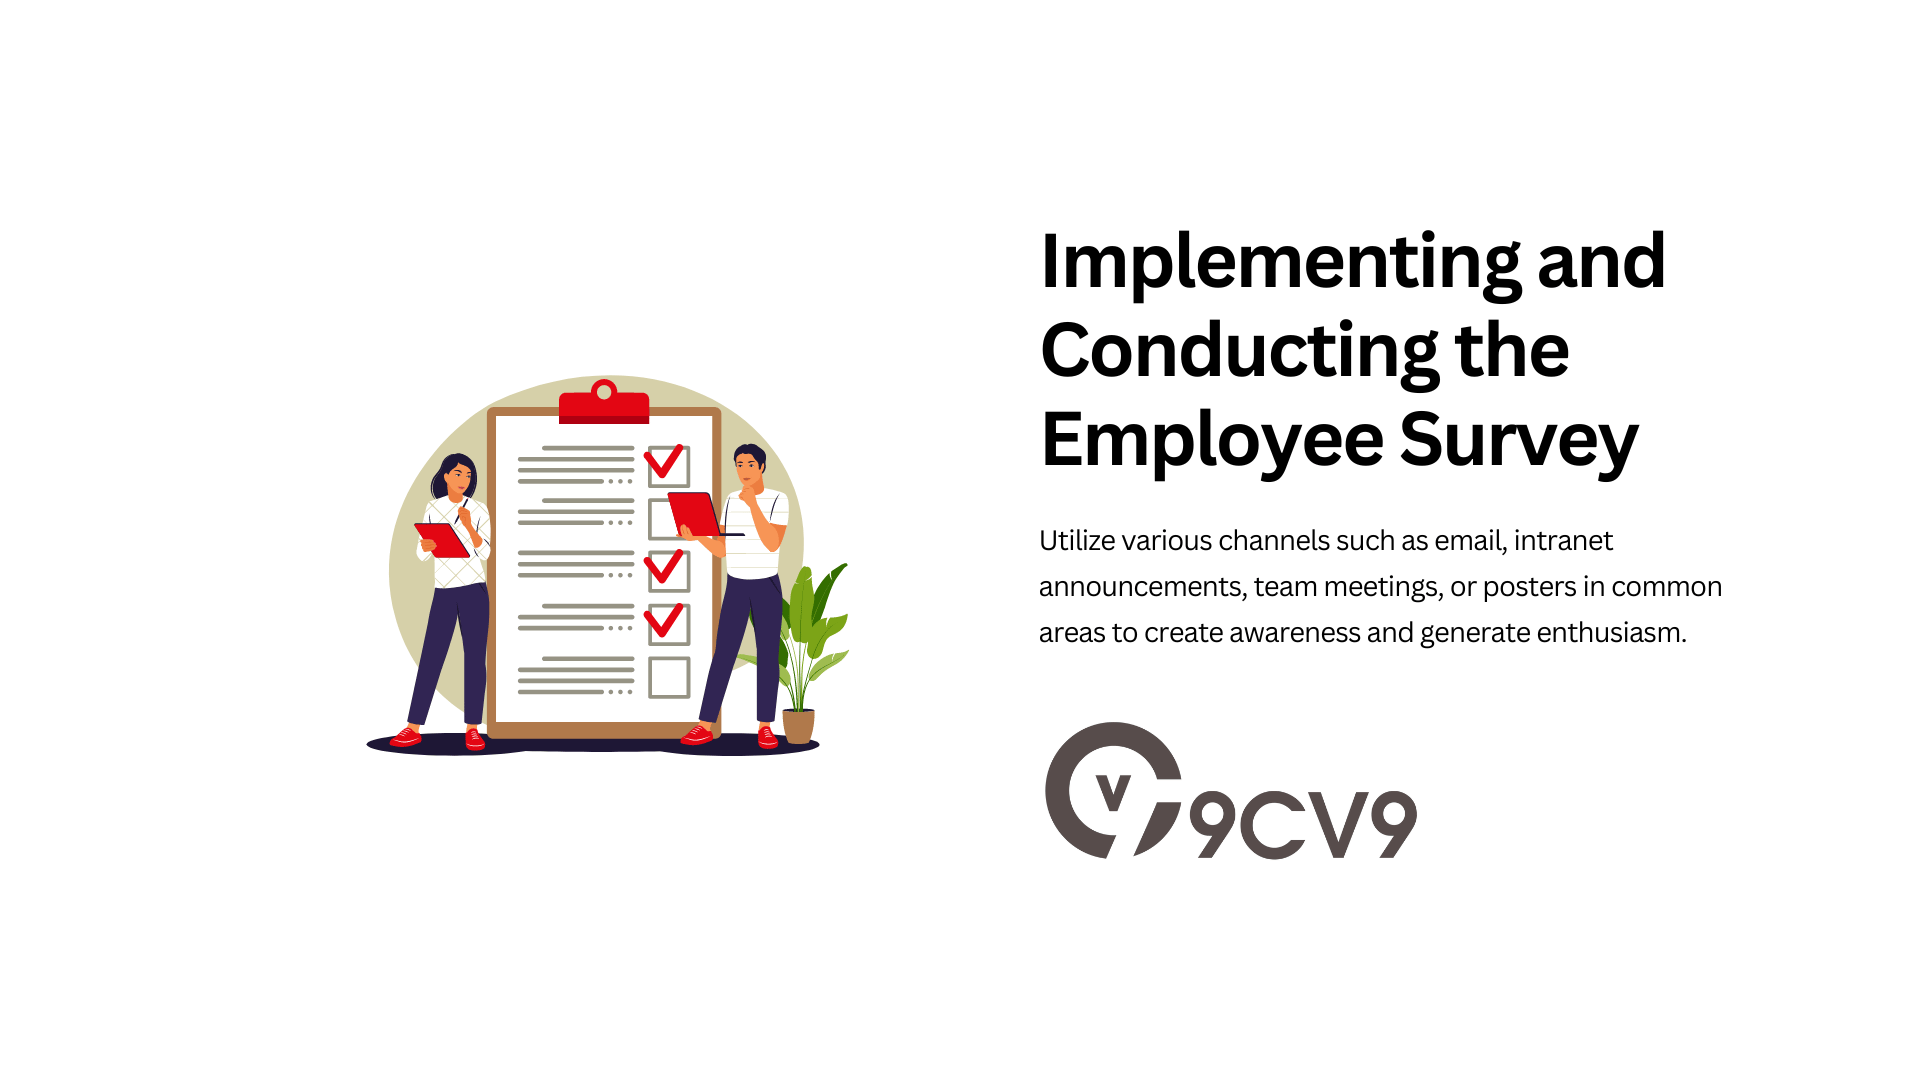 Implementing and Conducting the Employee Survey